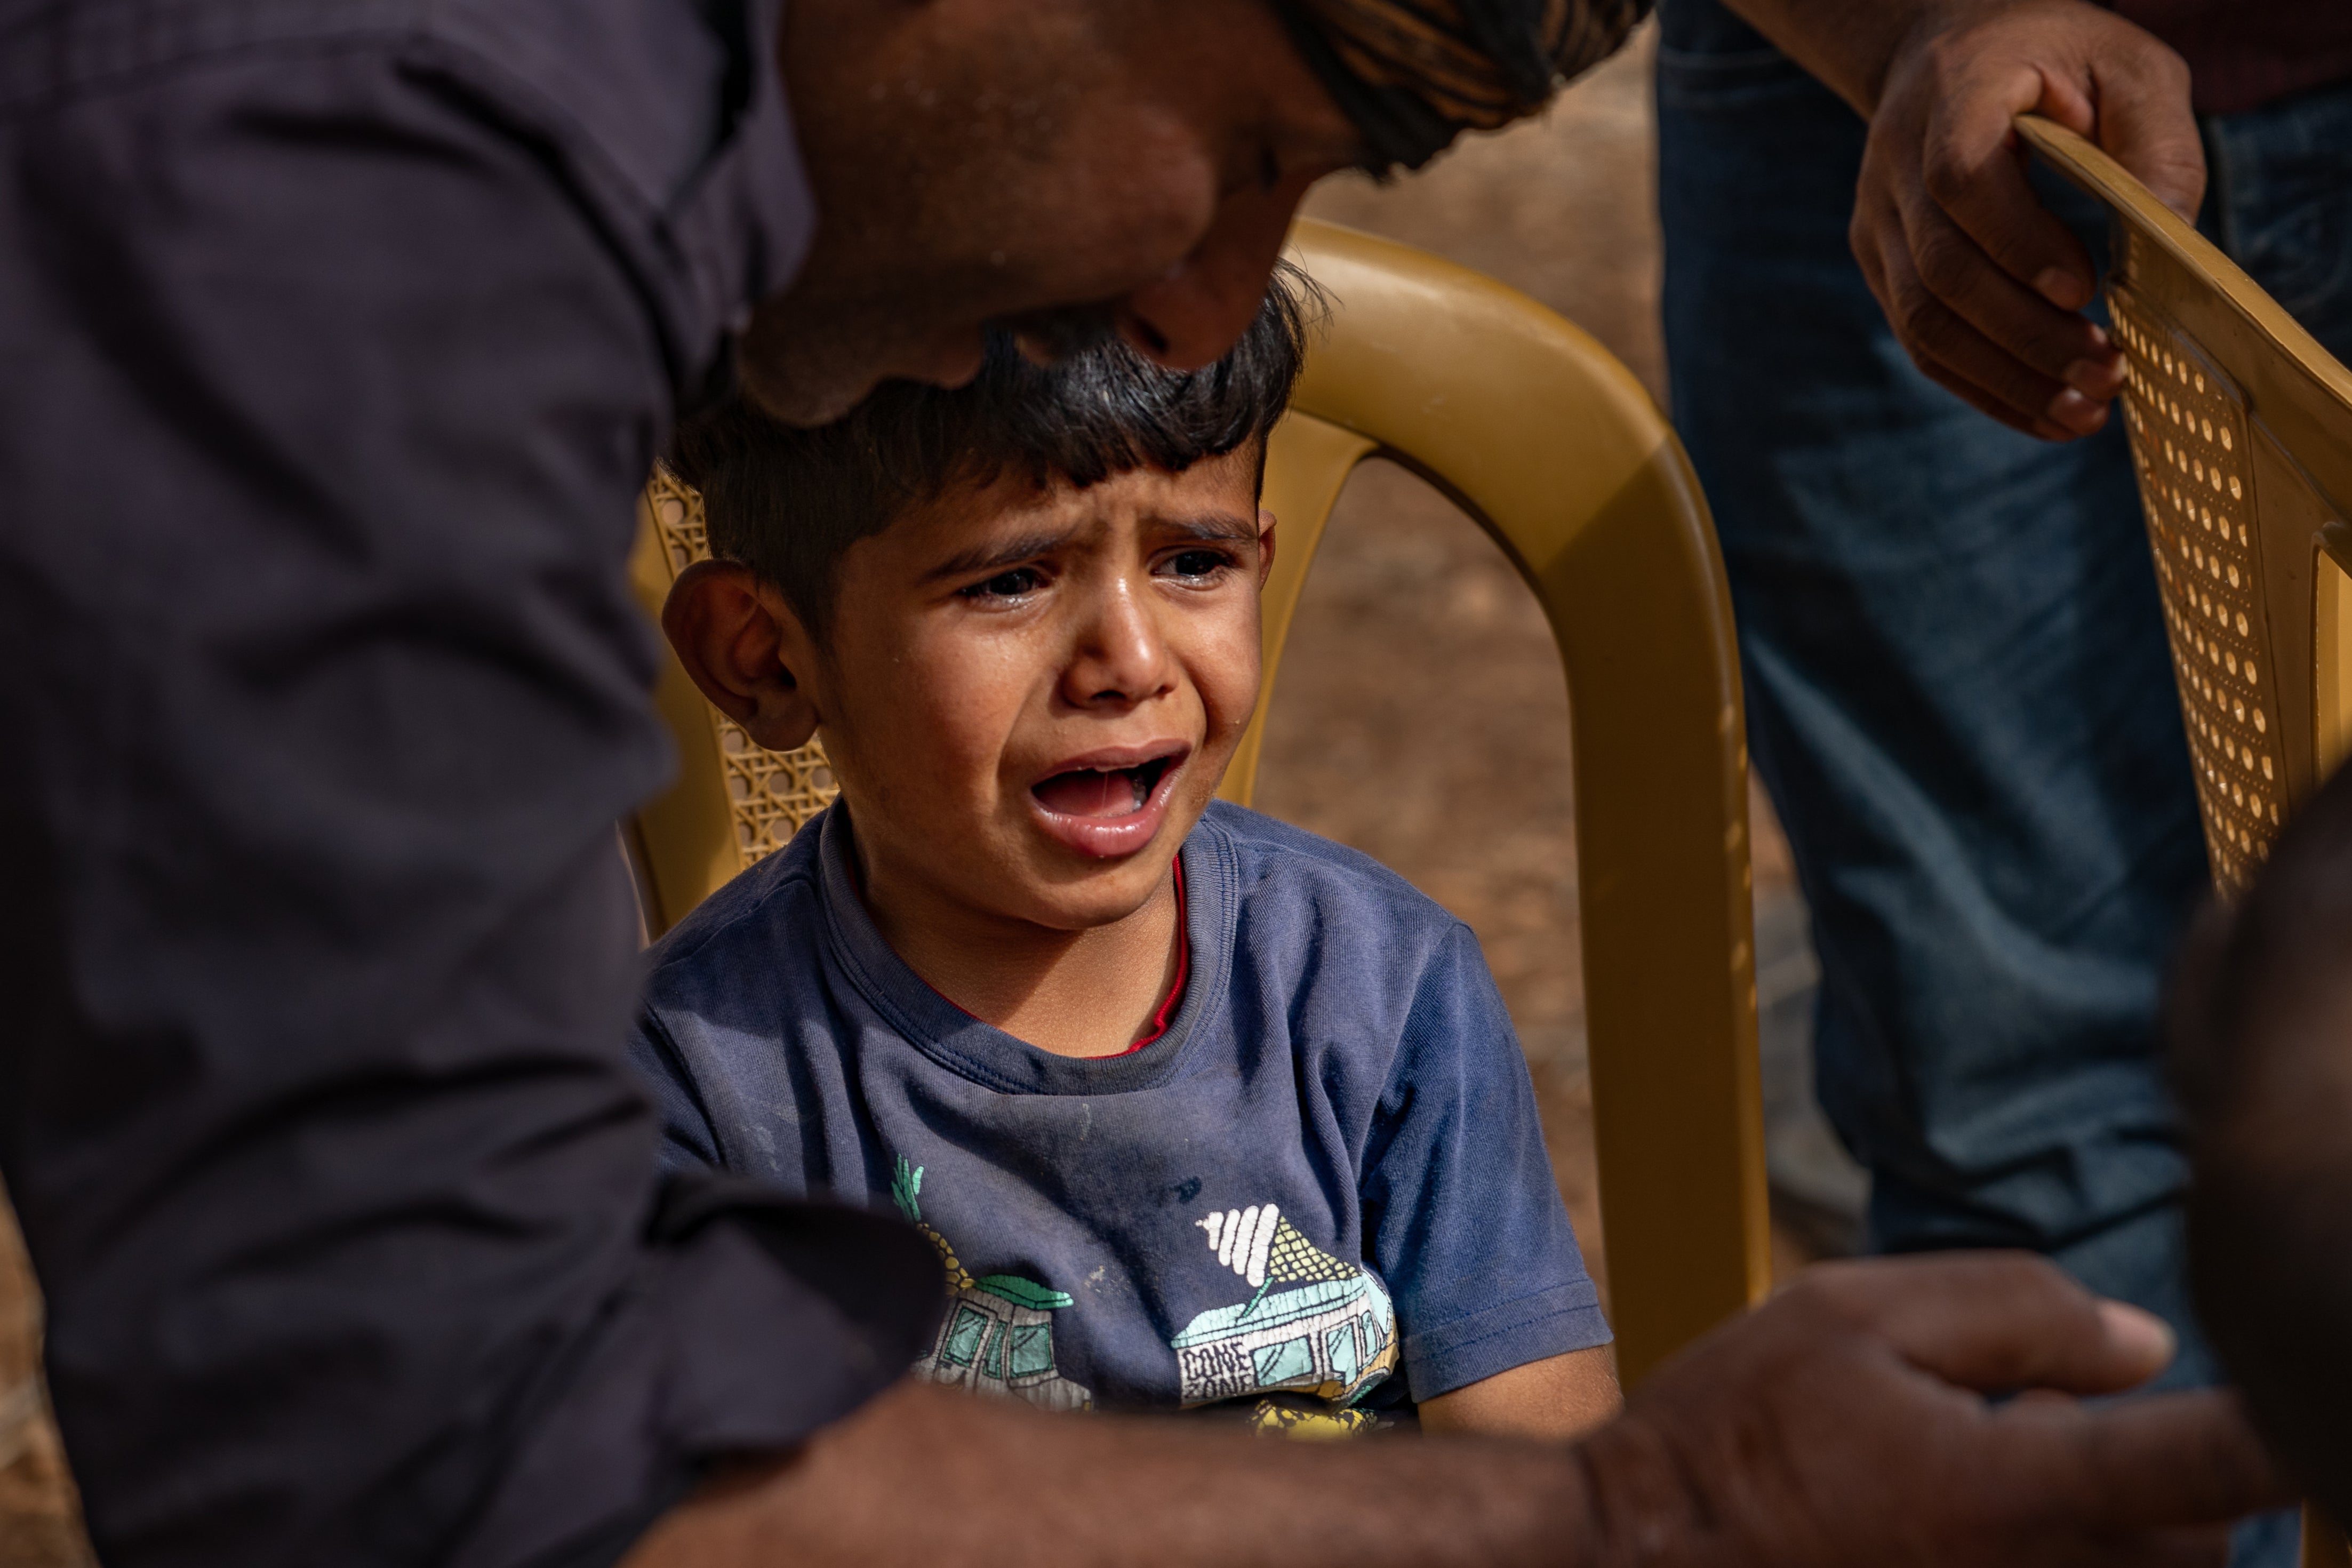 The six-year-old son of Ali Arrara, who has not stopped crying since the family were forced from their land at gunpoint